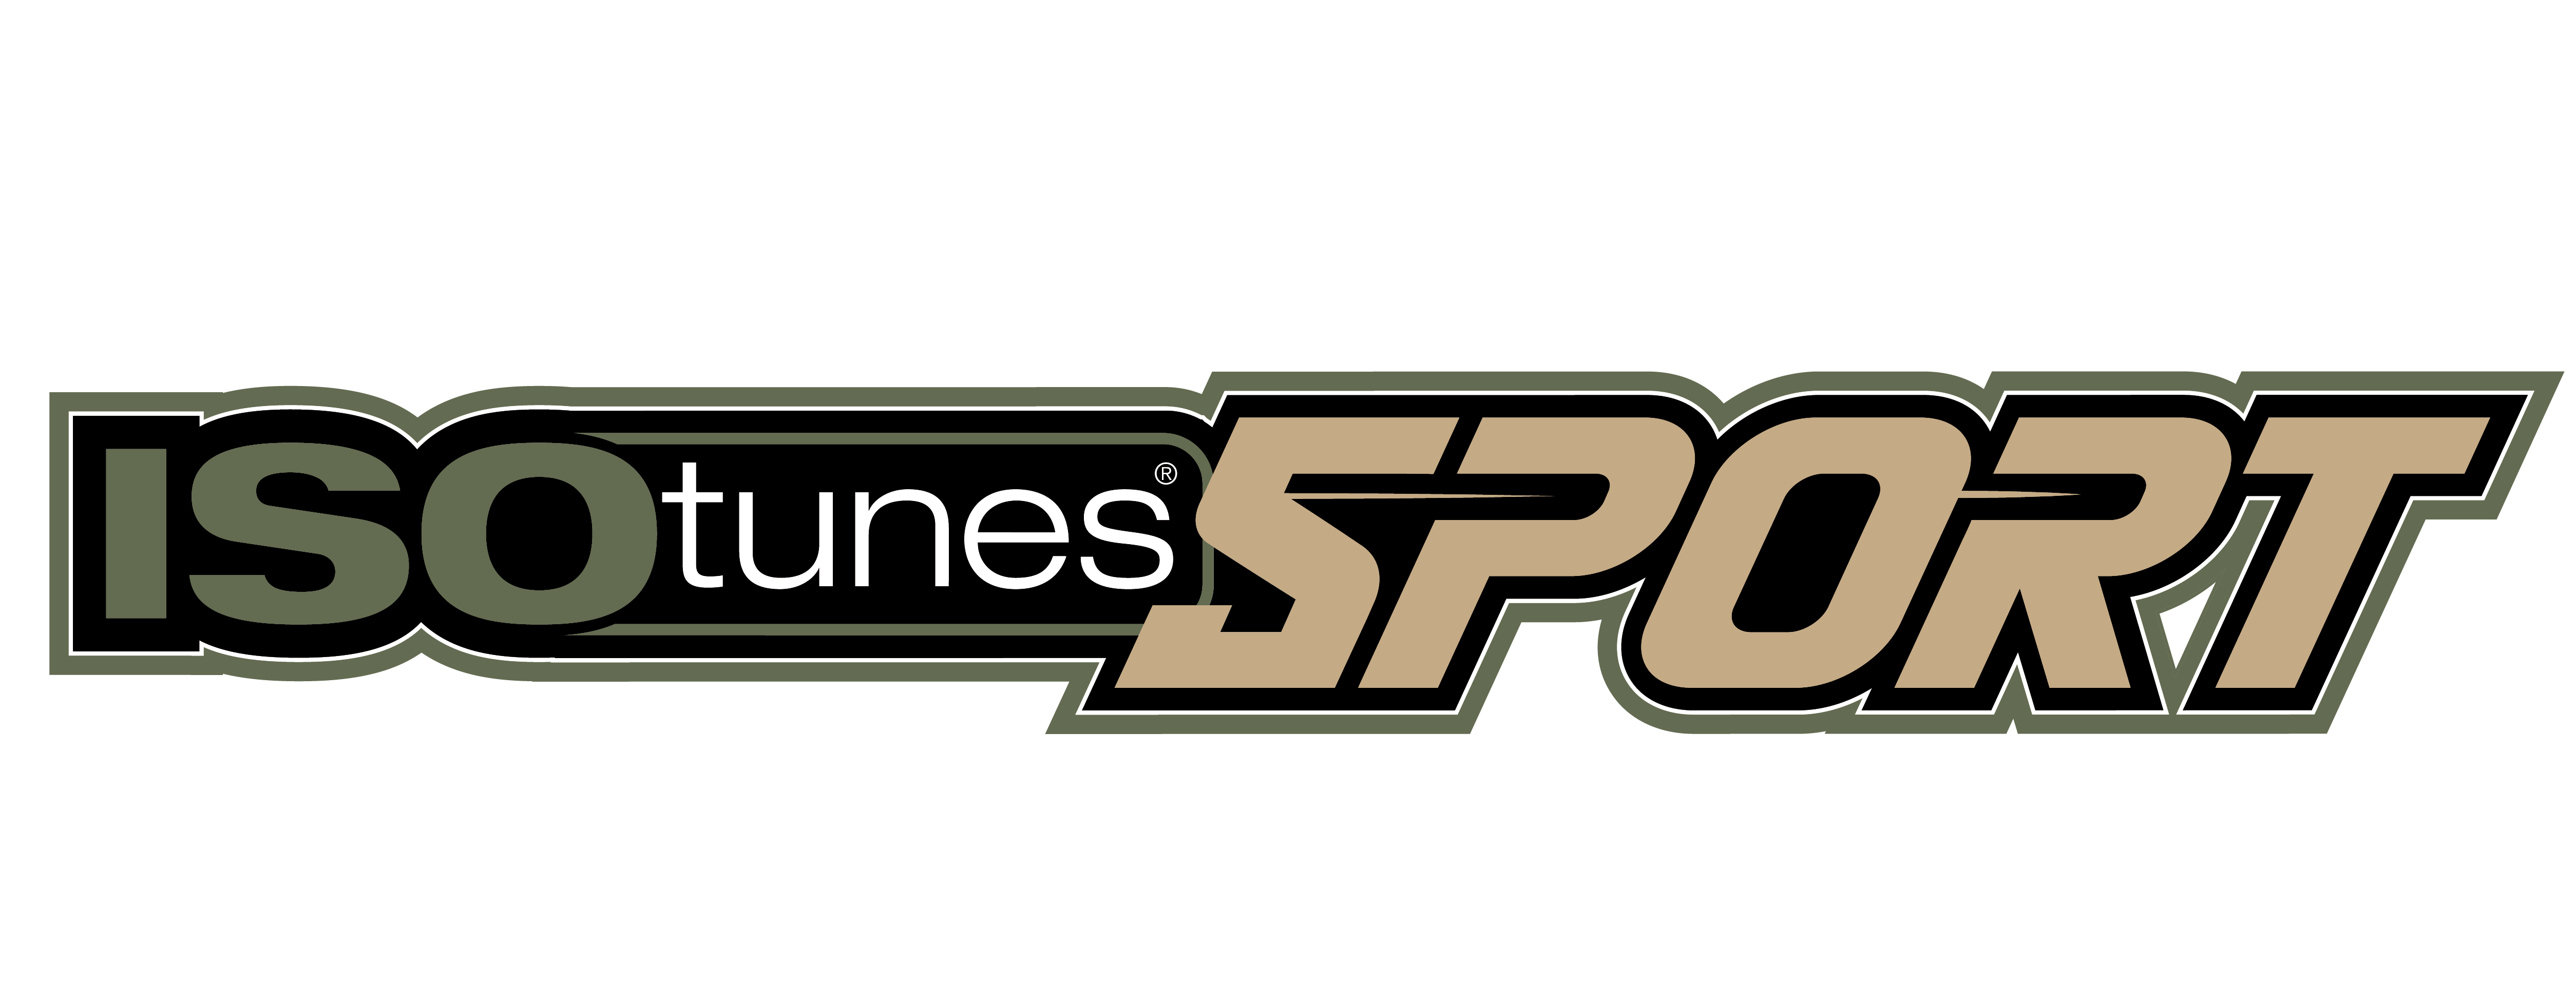 ISOtunesSport_Logos_Final_Color.png (236 KB)